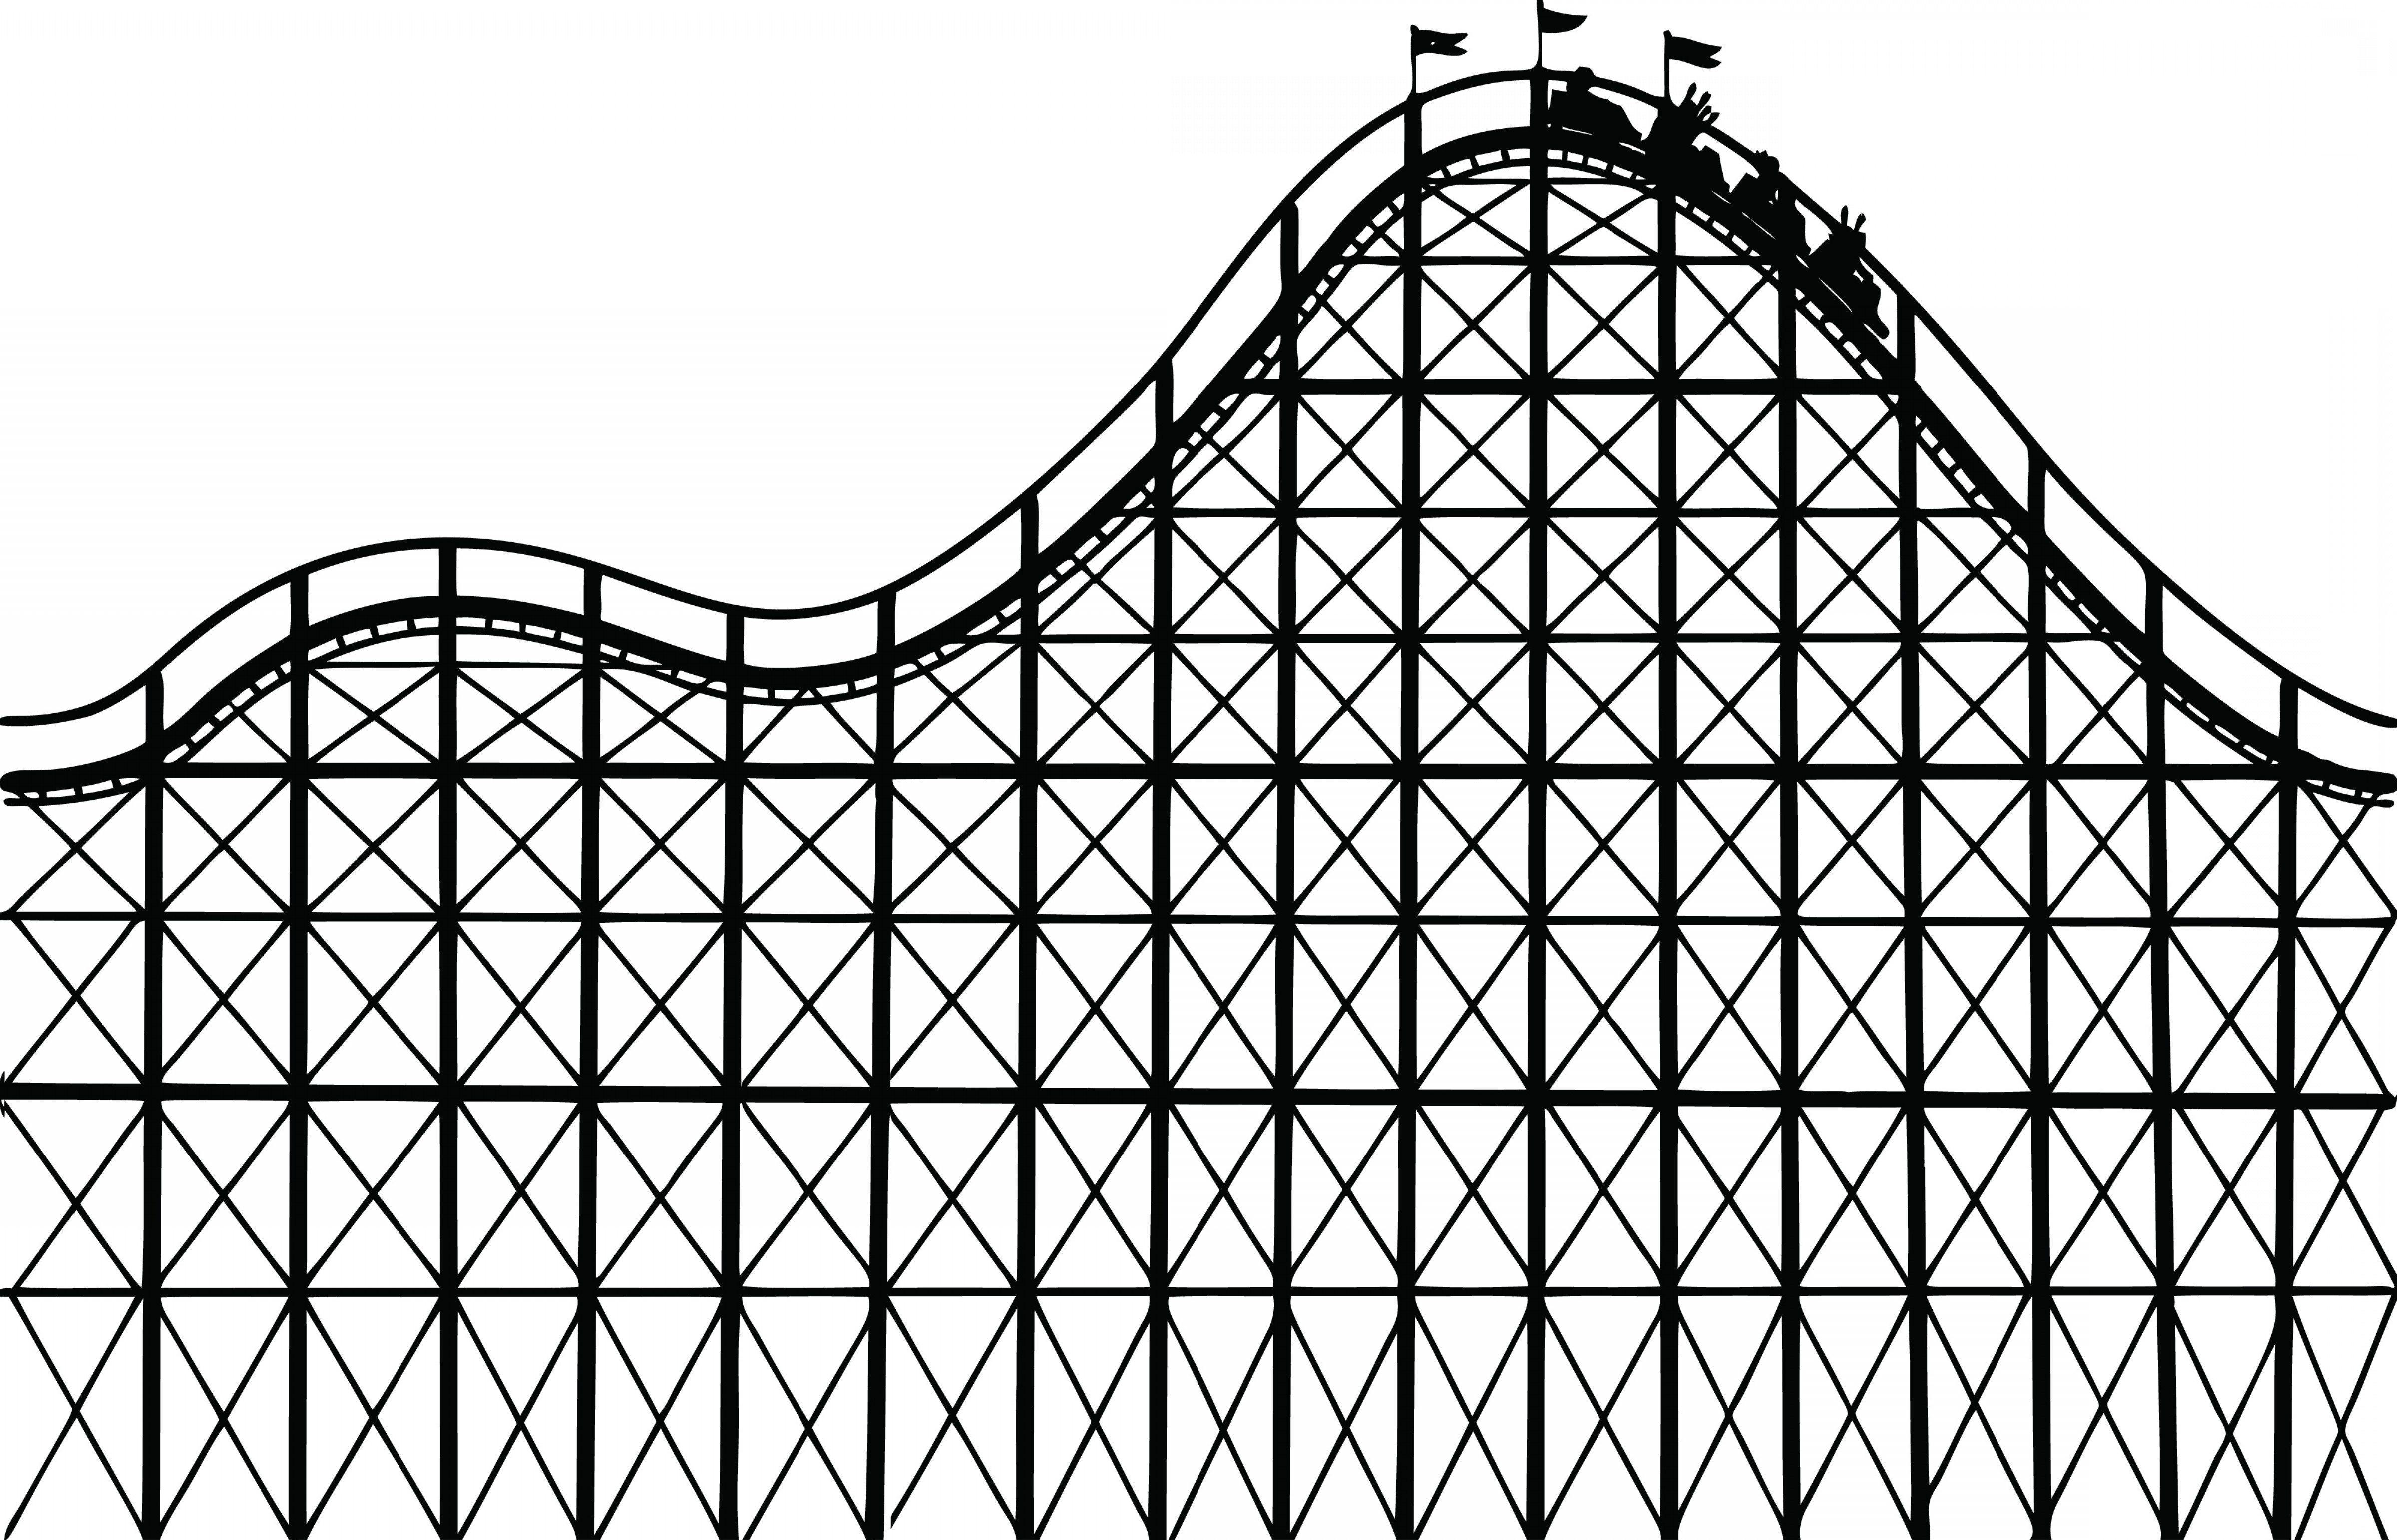 Free Clipart Of A Roller Coaster.